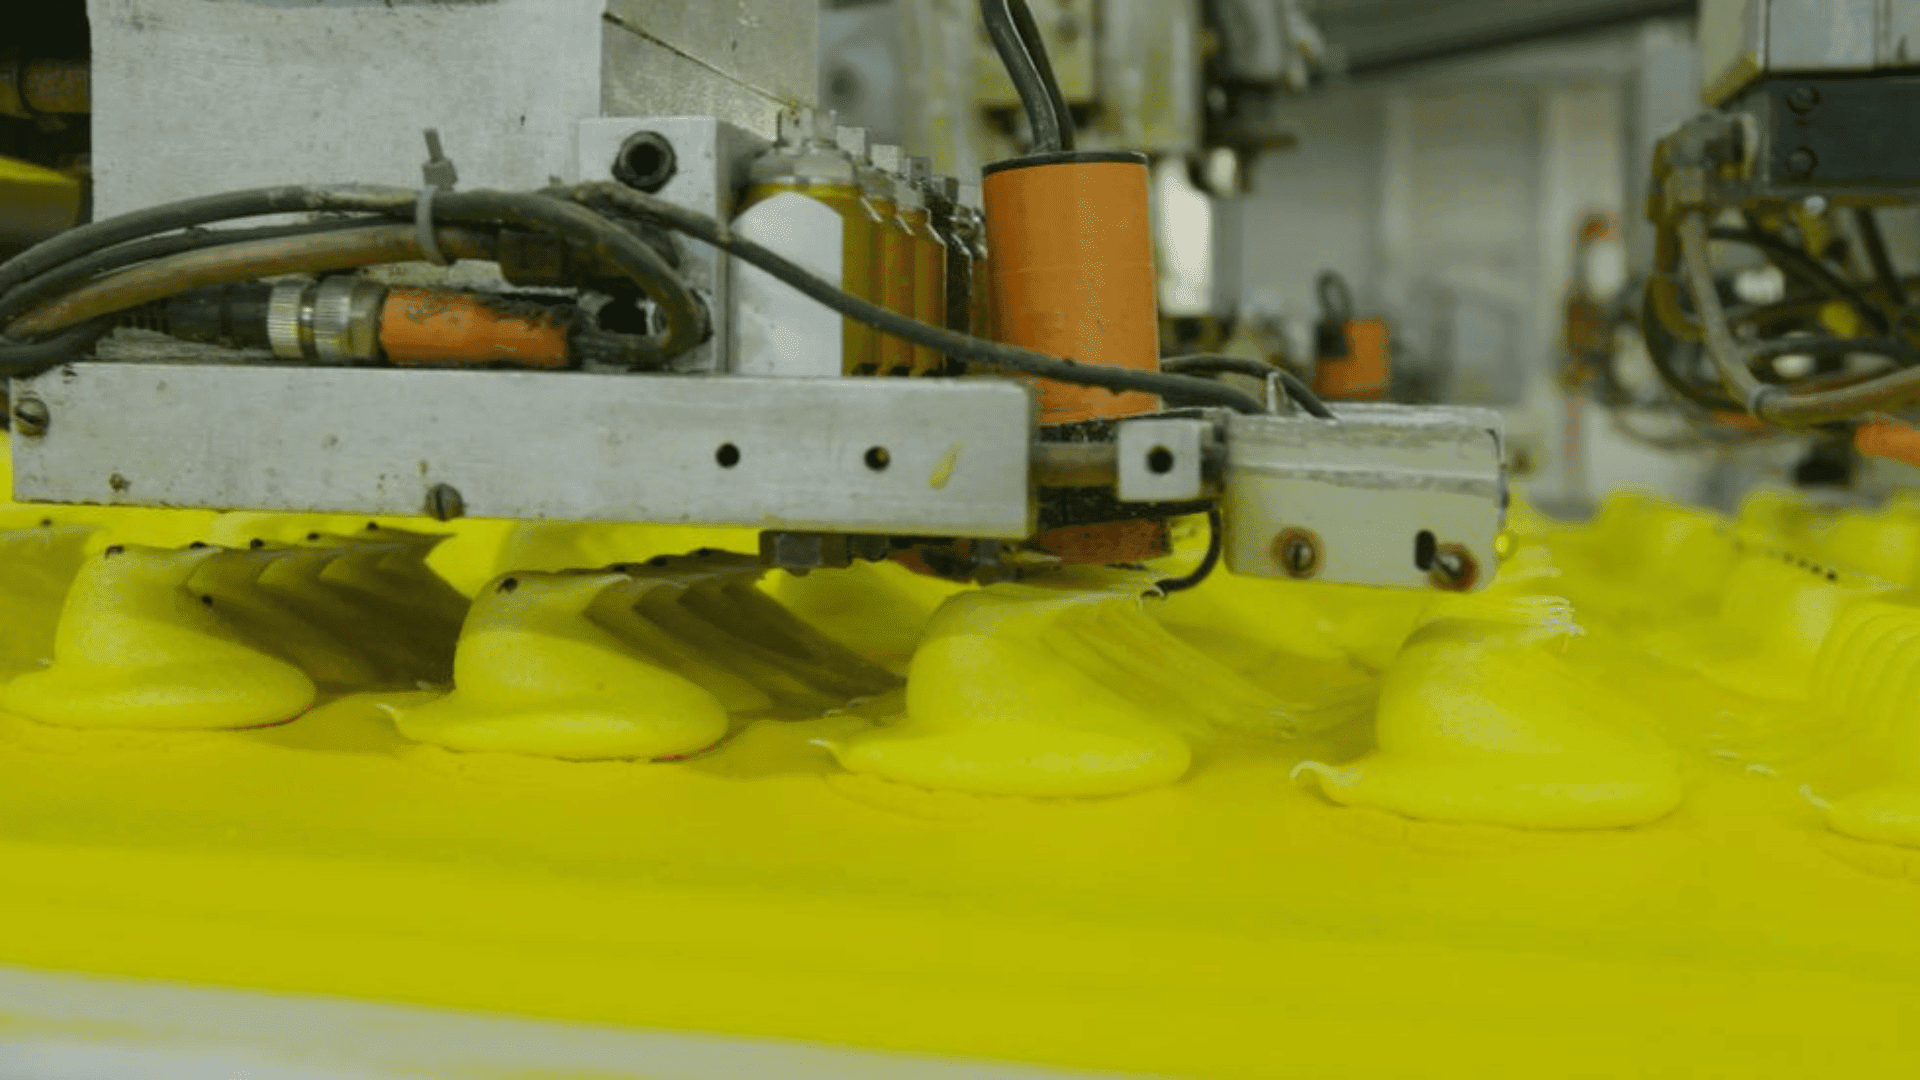 Creation and manufacturing process behind Peeps Candy CHELSEA LUPKIN